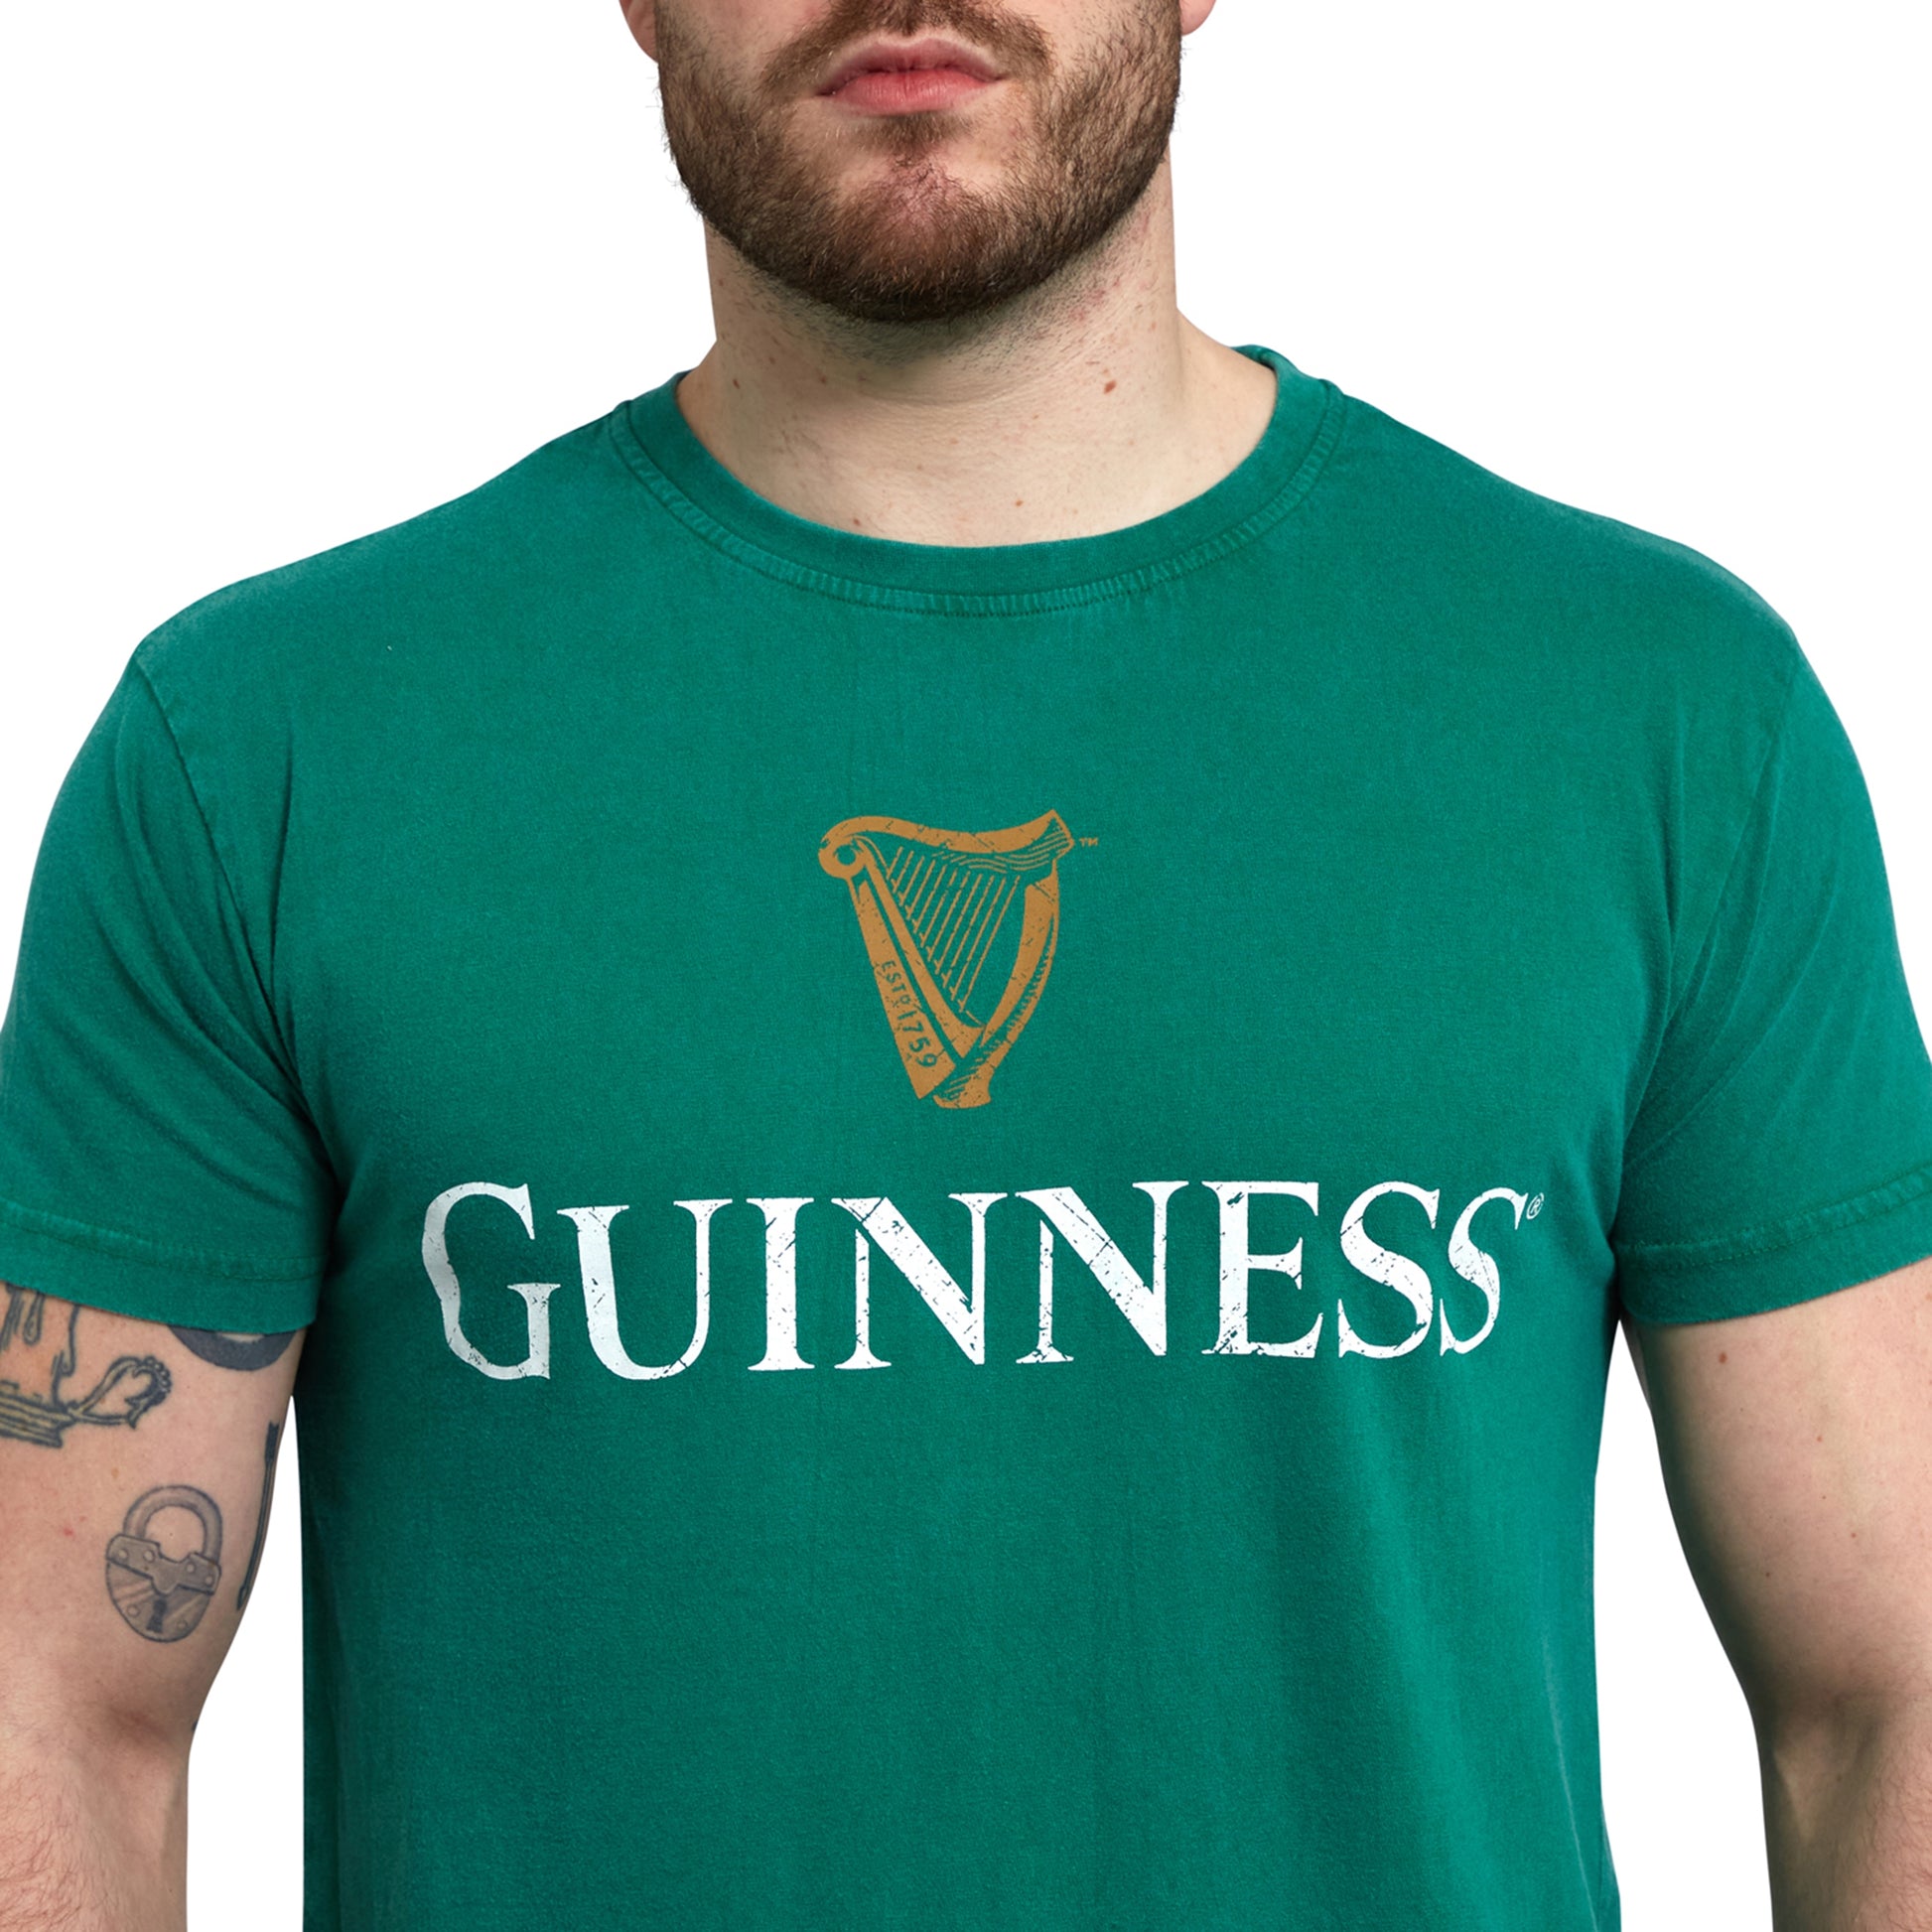 A man wearing a Green Guinness Harp Premium T-Shirt, showcasing the iconic Harp symbol, representing Ireland and produced by Guinness UK.